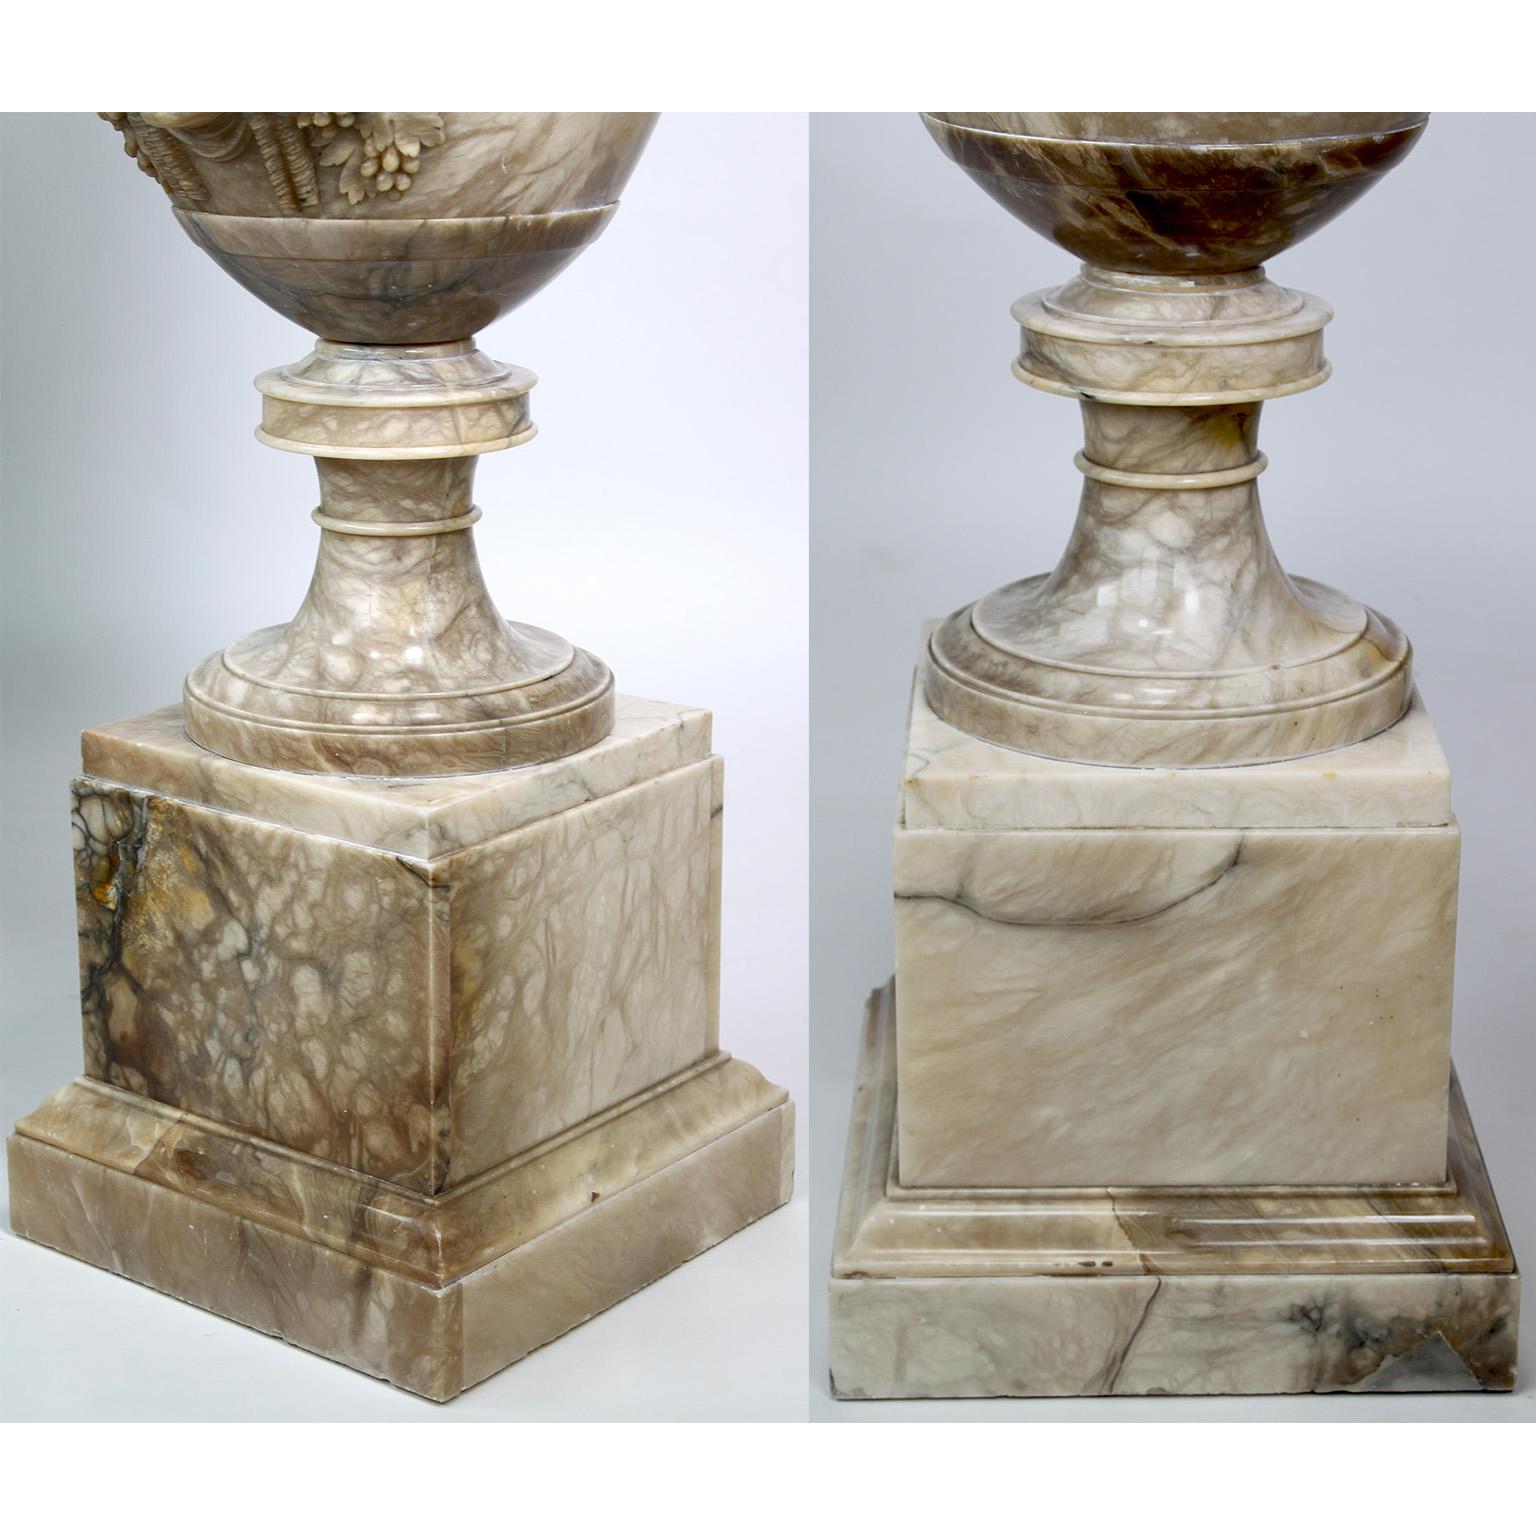 Monumental Italian 19th Century Renaissance Revival Style Carved Alabaster Urn  For Sale 16